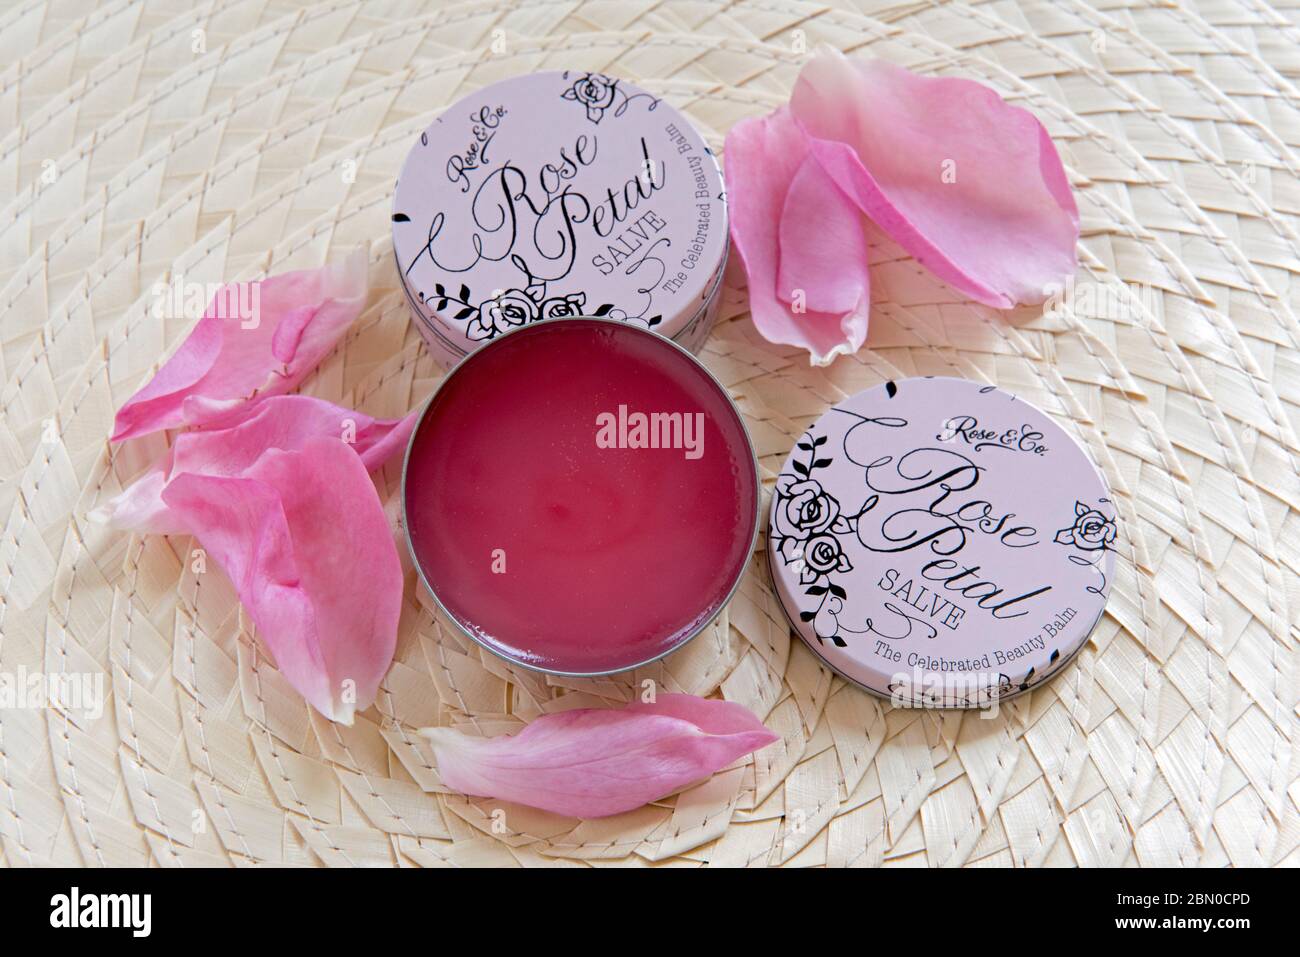 Rose Petal Lip Salve or Balm in round pink tin tins with rose petals as decoration on palm leaf background.  Zero waste cosmetics. Stock Photo